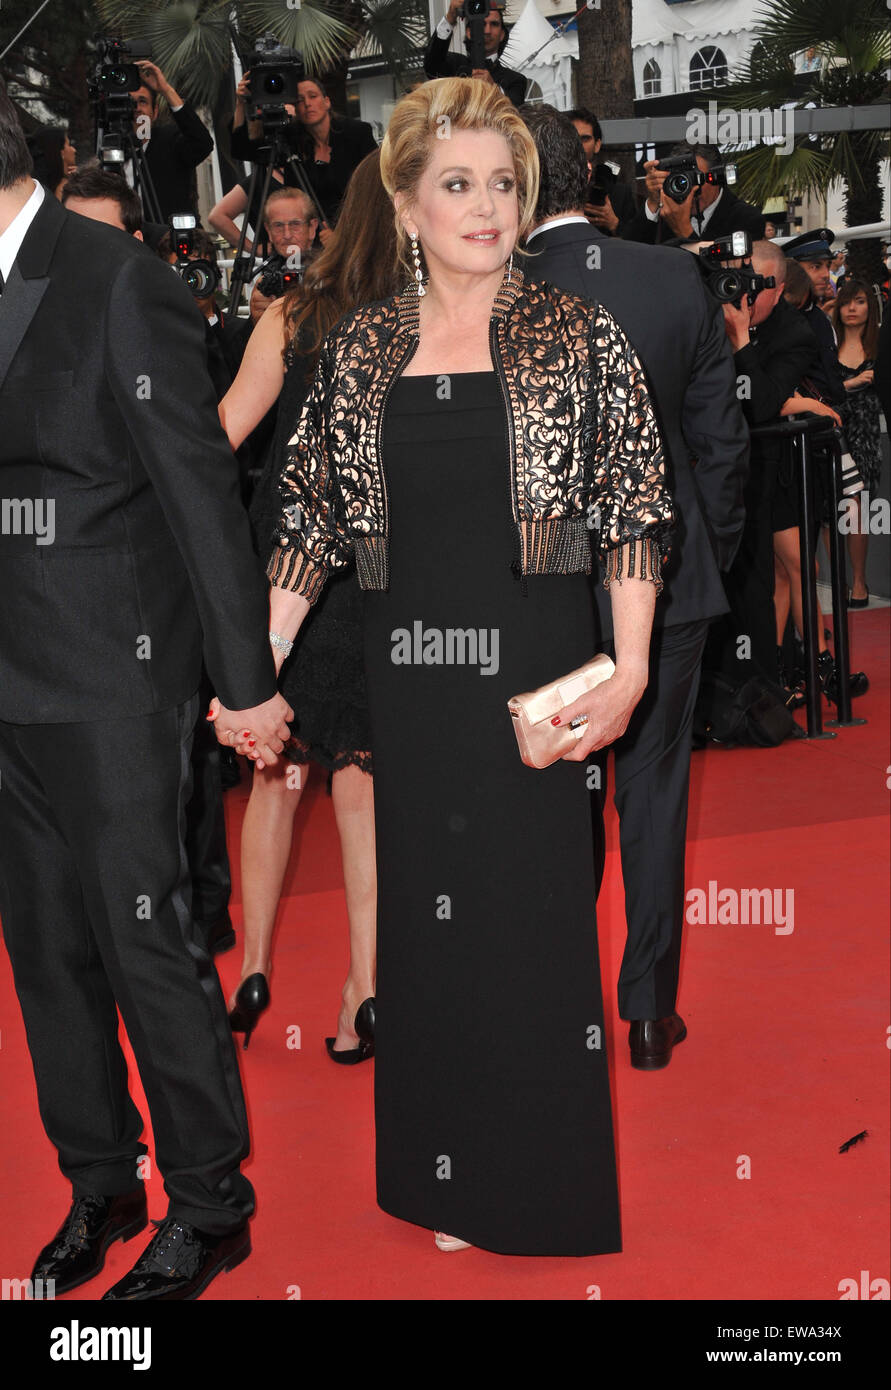 CANNES, FRANCE - MAY 22, 2011: Catherine Deneuve  at the 64th Festival de Cannes awards gala. EDITORIAL USE ONLY. © Jaguar Stock Photo